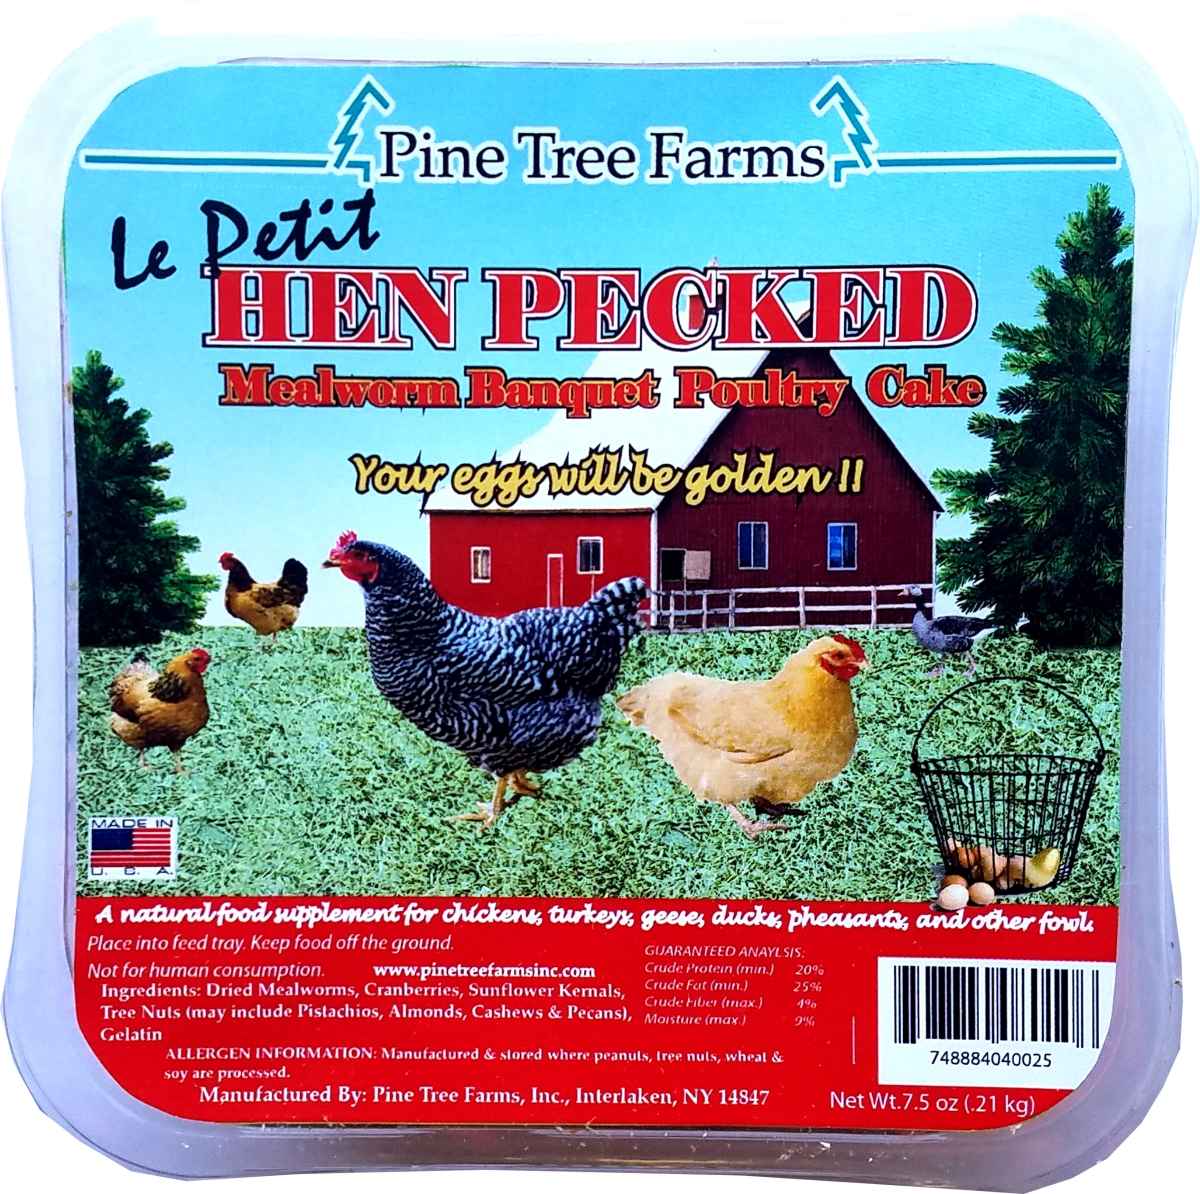 Ptf4002 Hen Pecked Mealworm Poultry Lepetit Cake, 7.5 Oz